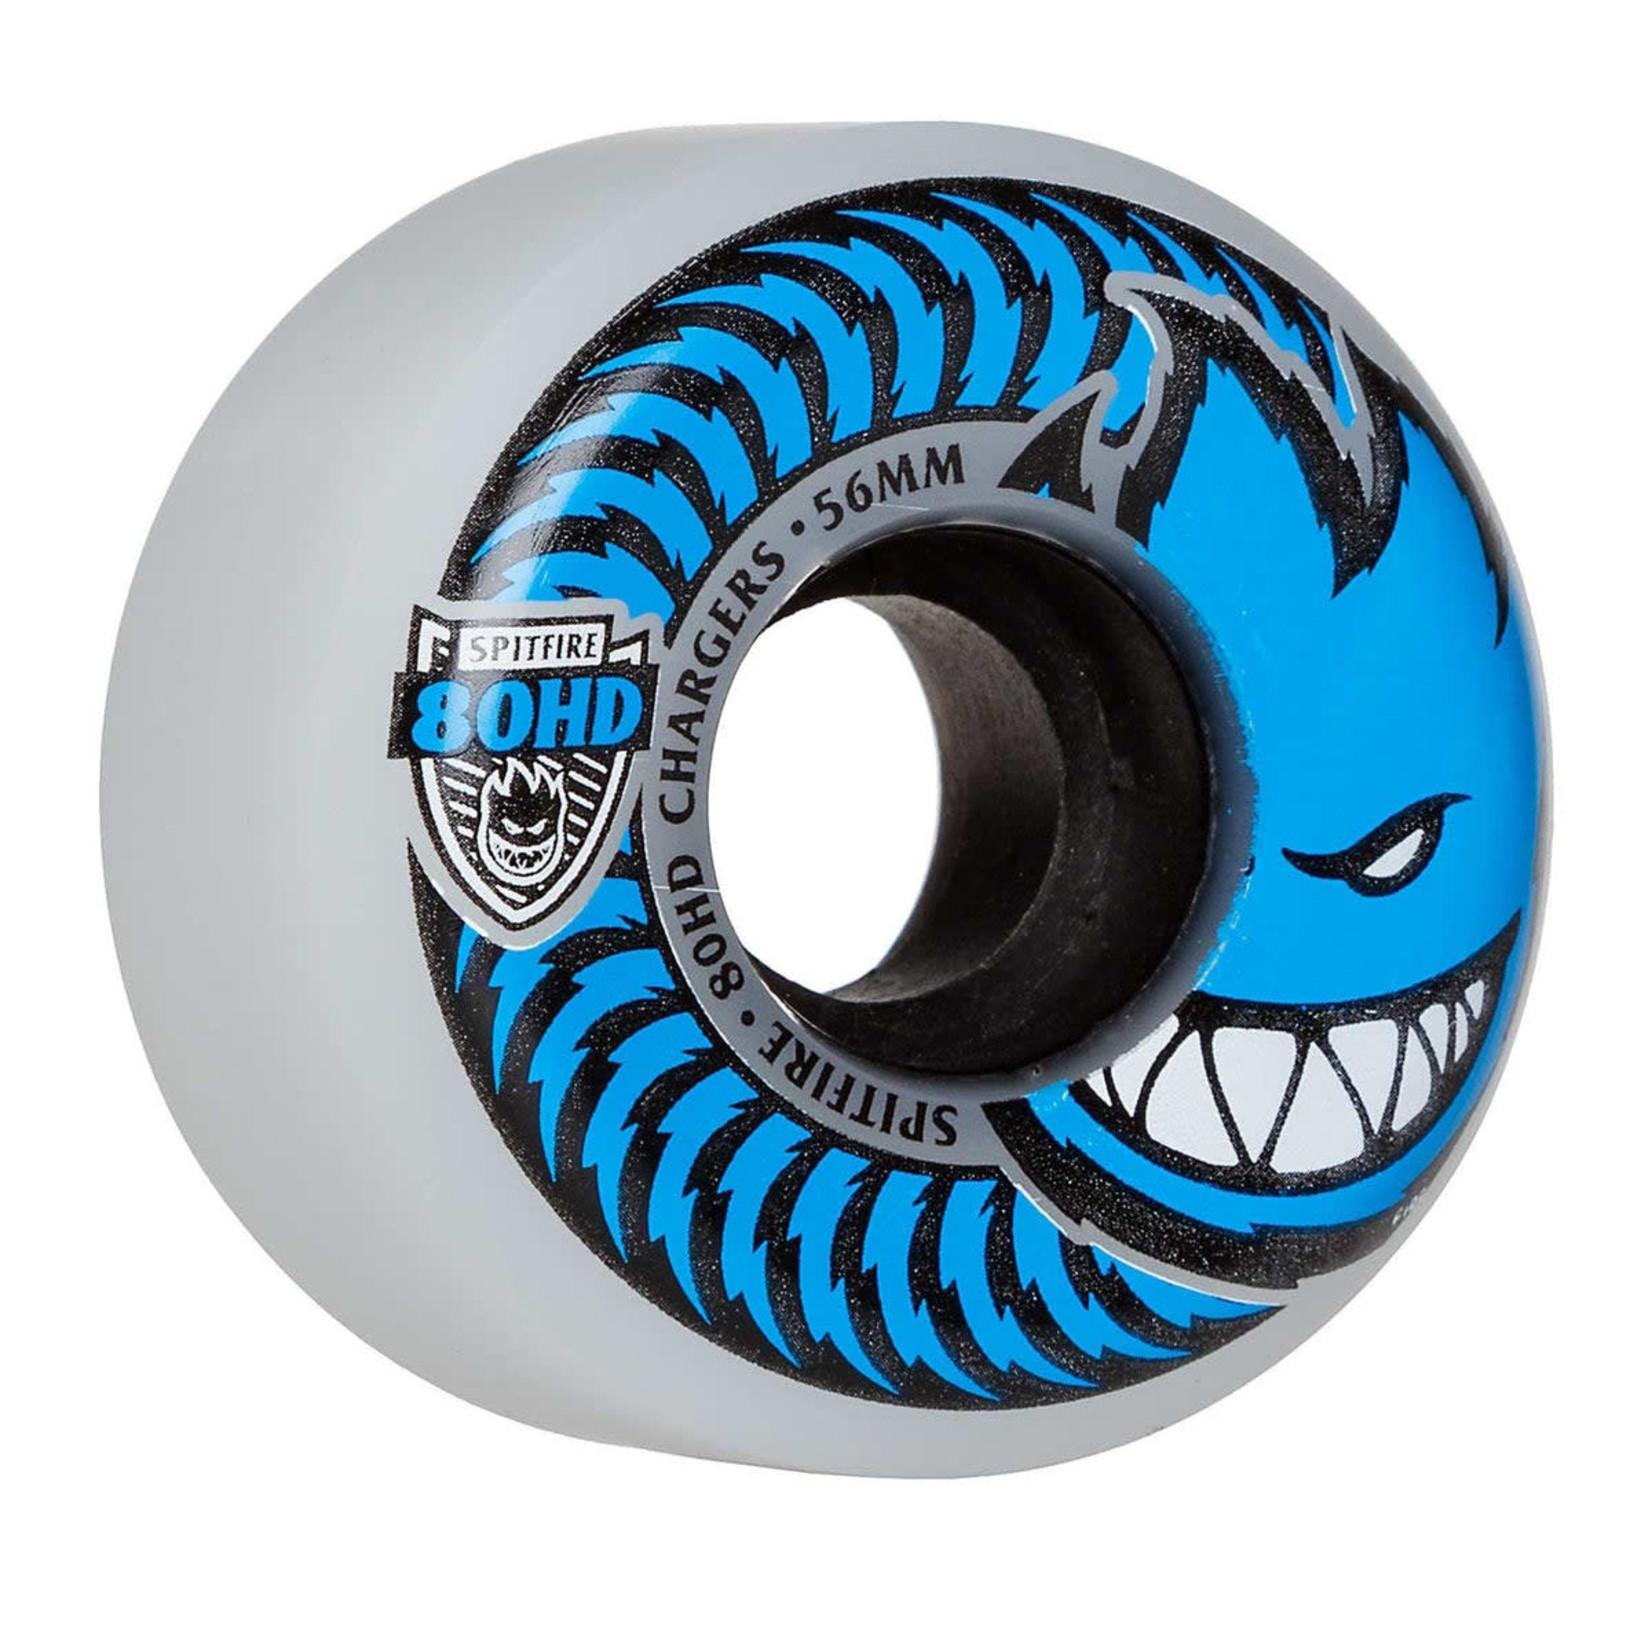 Spitfire Spitfire 80HD Conical Full Wheels 58mm